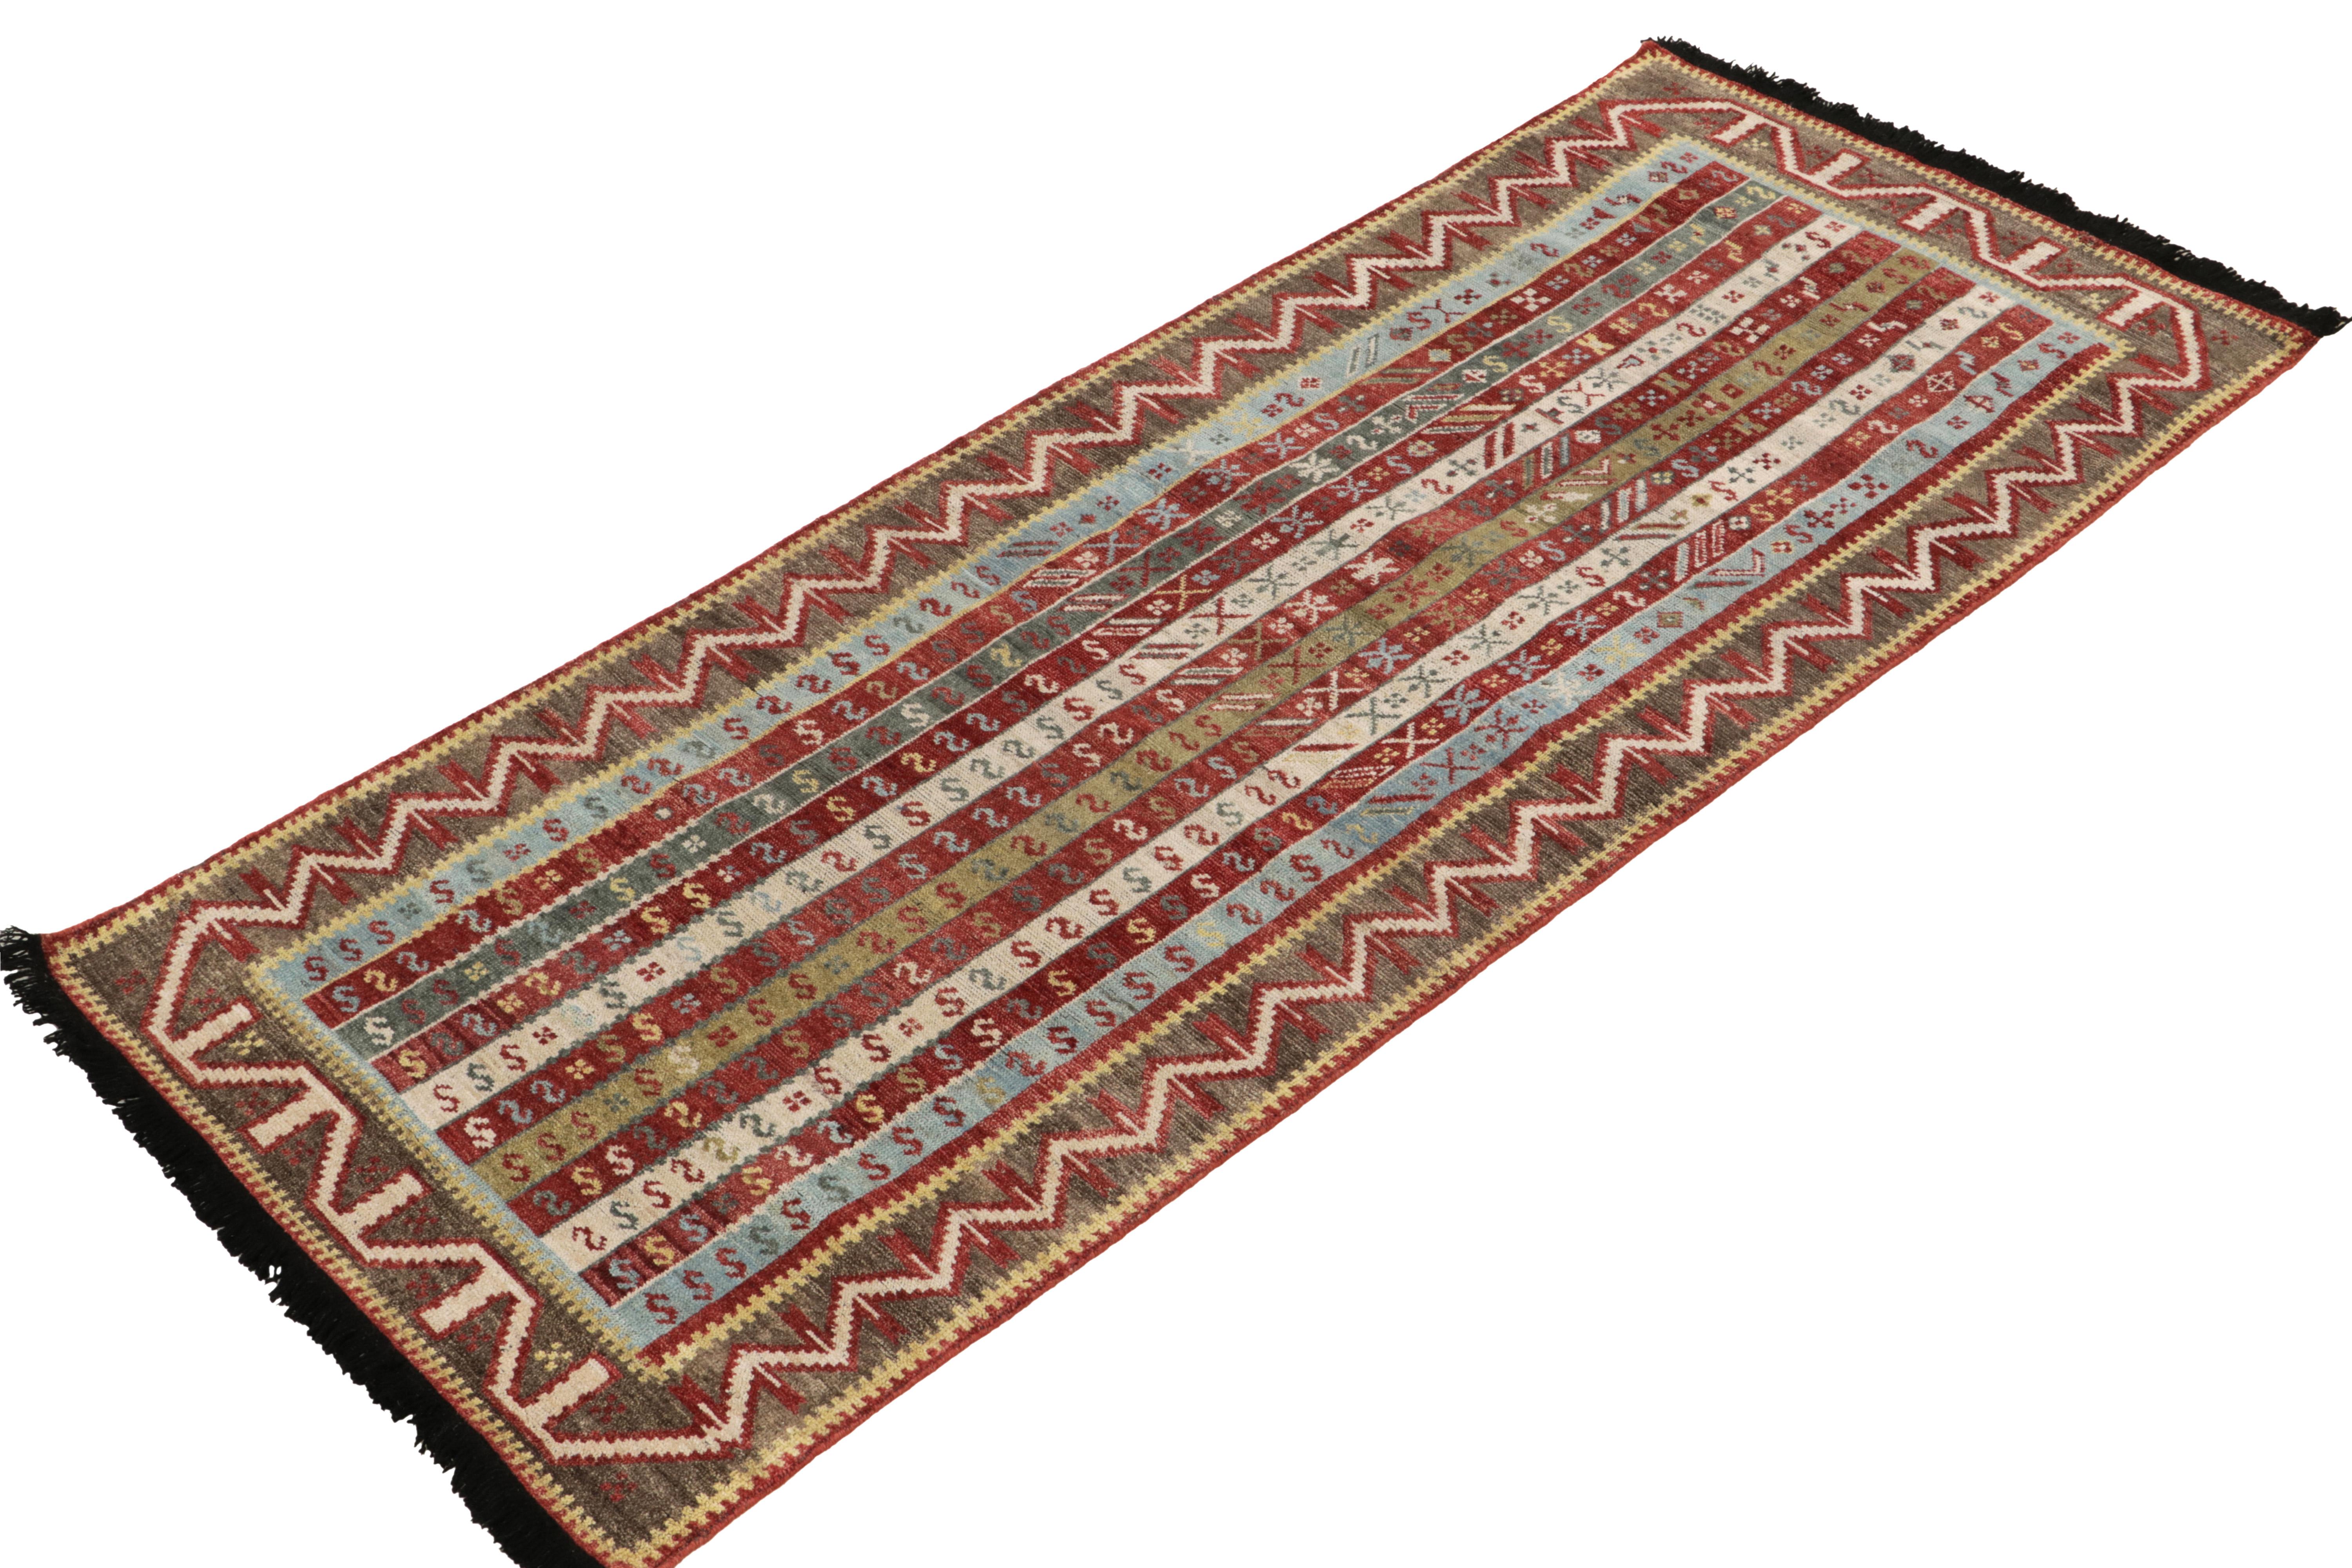 Indian Rug & Kilim's Tribal Style runner in Multicolor Stripes, Geometric Pattern